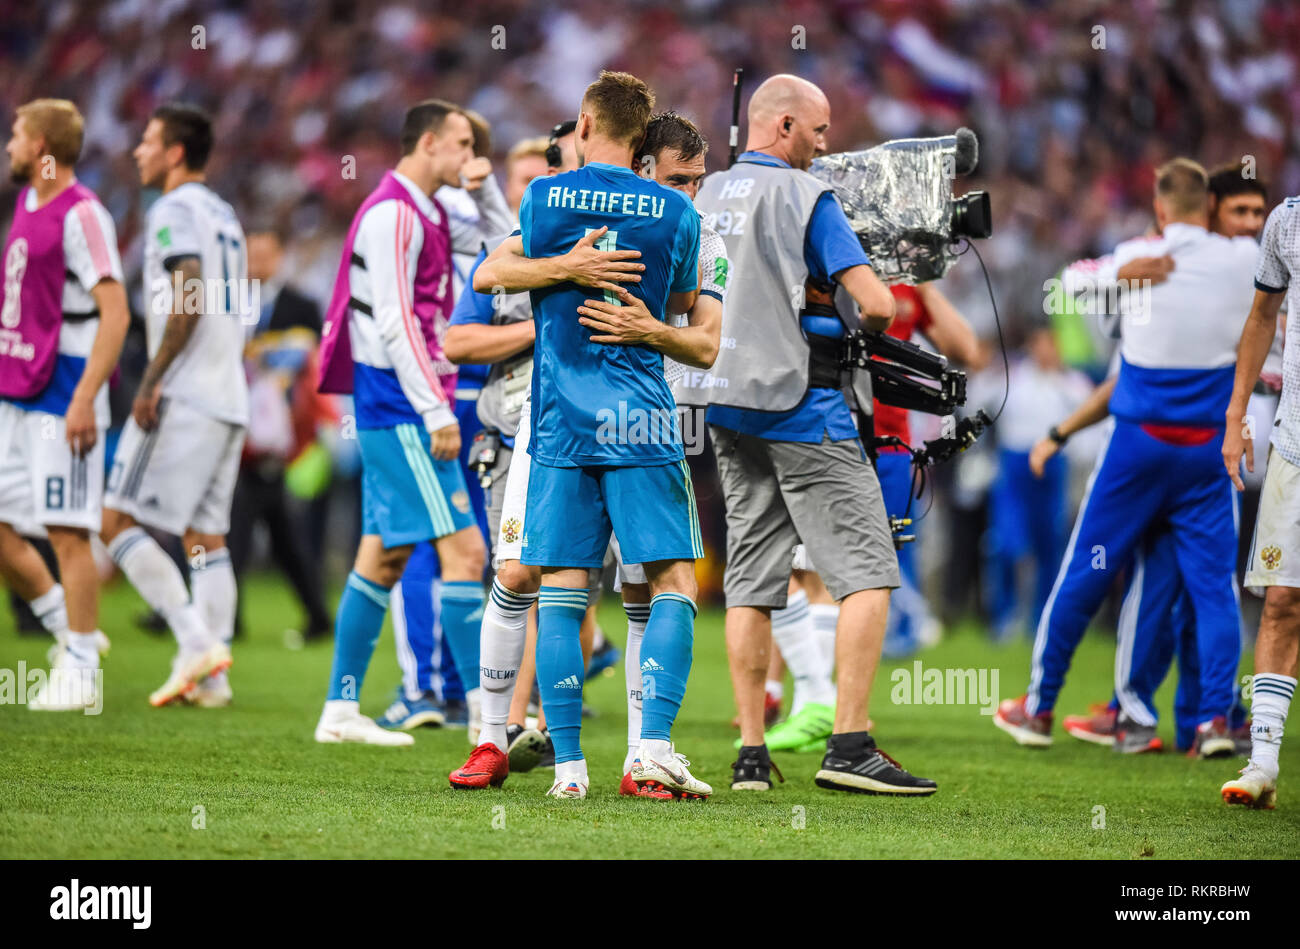 Moscow, Russia - July 1, 2018. Russian national team celebrating qualification to World Cup 2018 quarterfinals after penalty shootout in match against Stock Photo